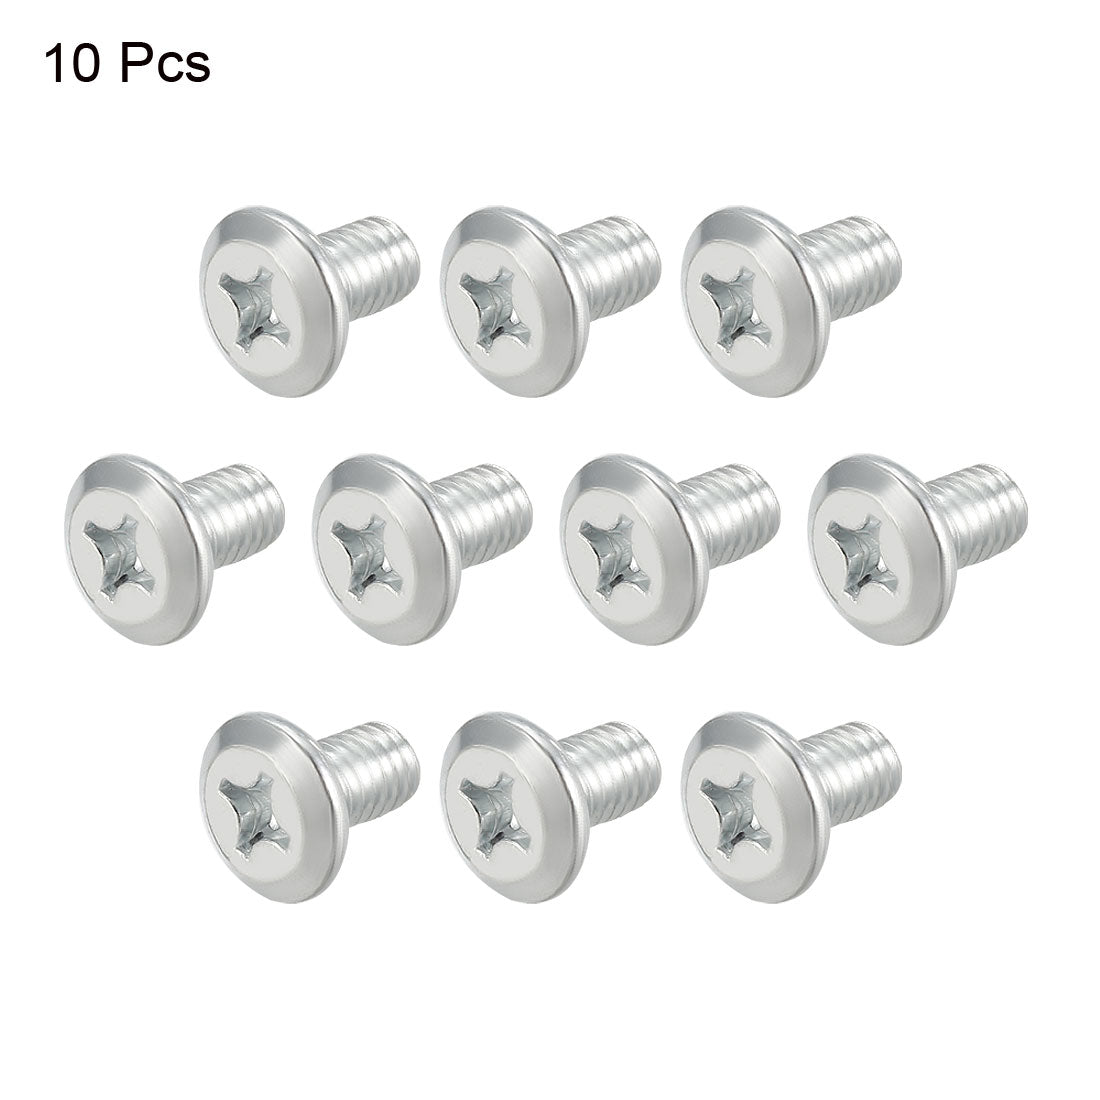 Uxcell Uxcell M6x16mm Phillips Head Machine Screws Zinc Plated Cross Screw Leather Fasteners Bolts for Account Book Full Thread Carbon Steel 20Pcs